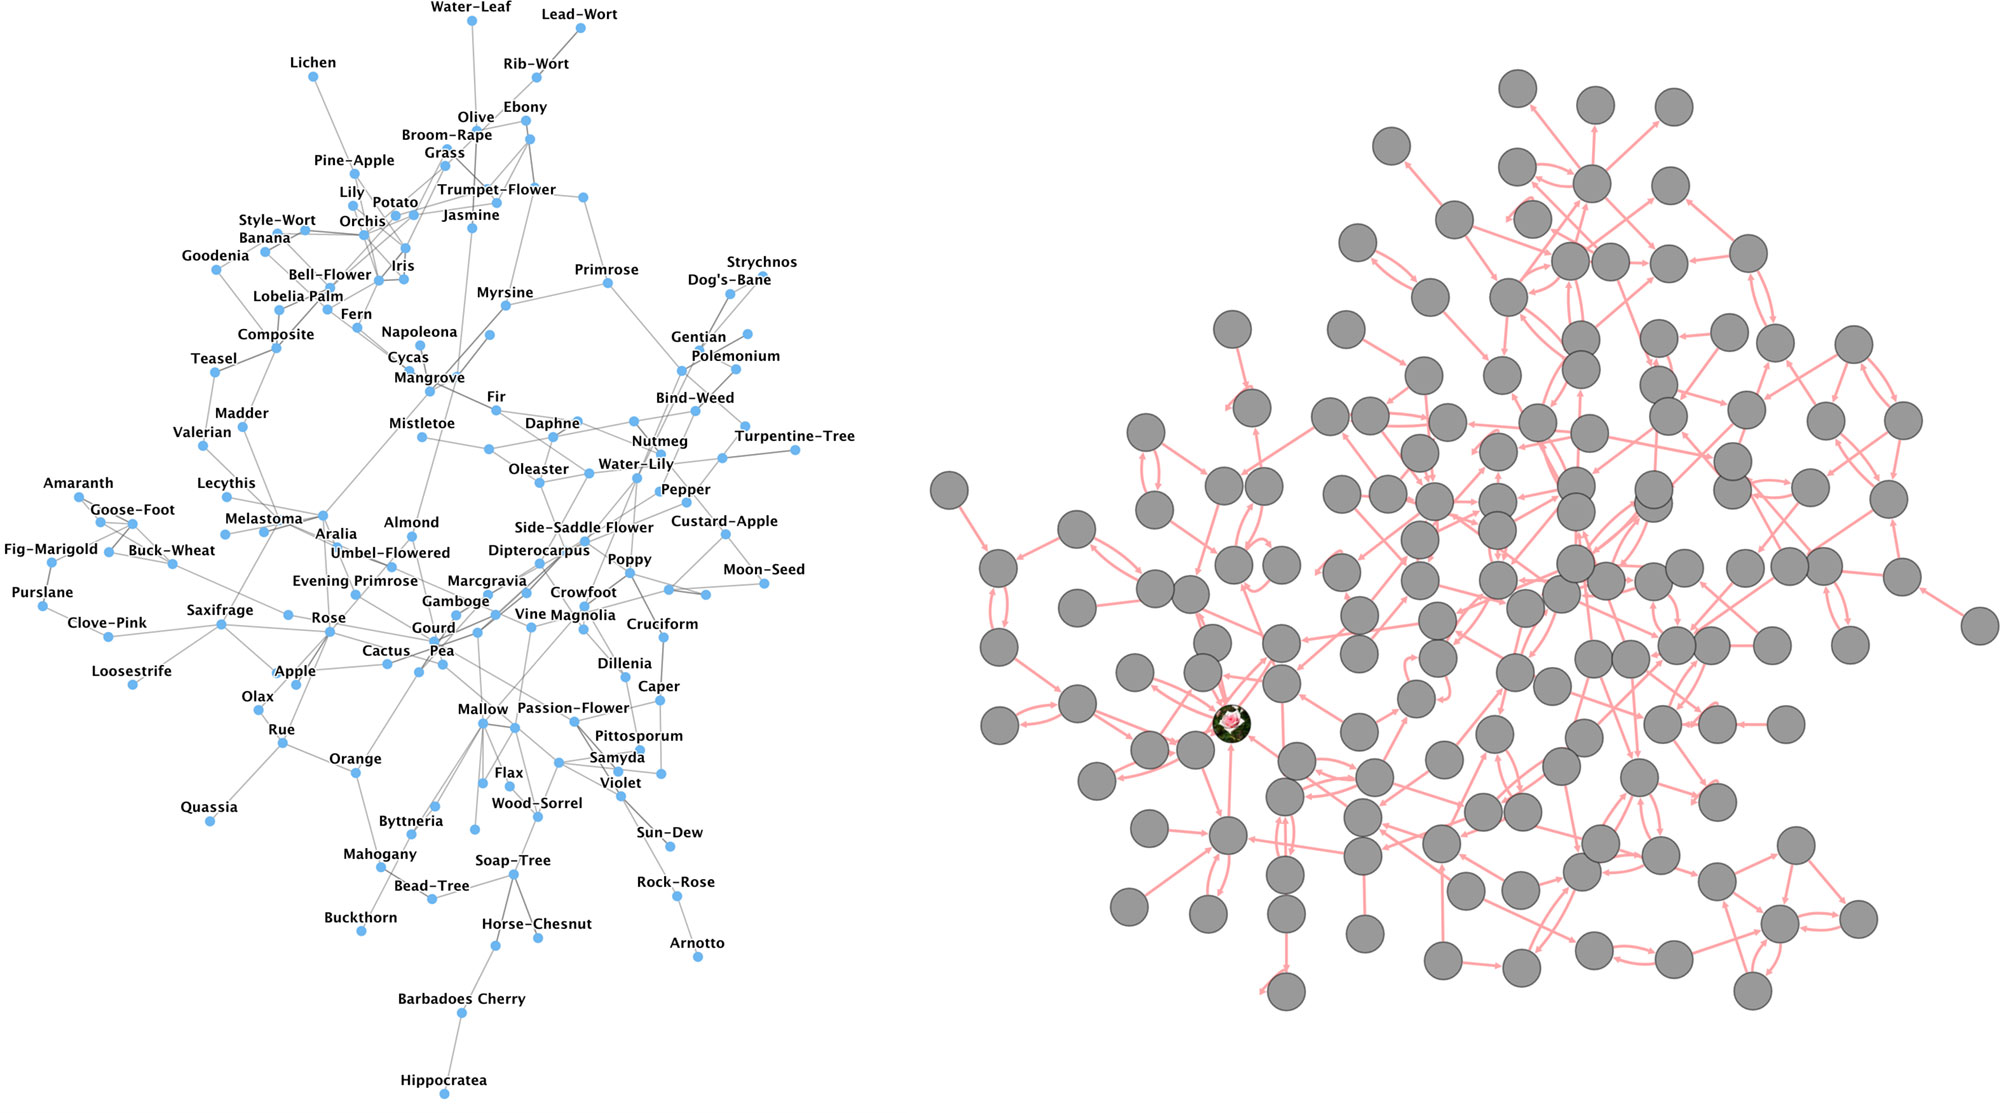 Early examples of messy network graphs